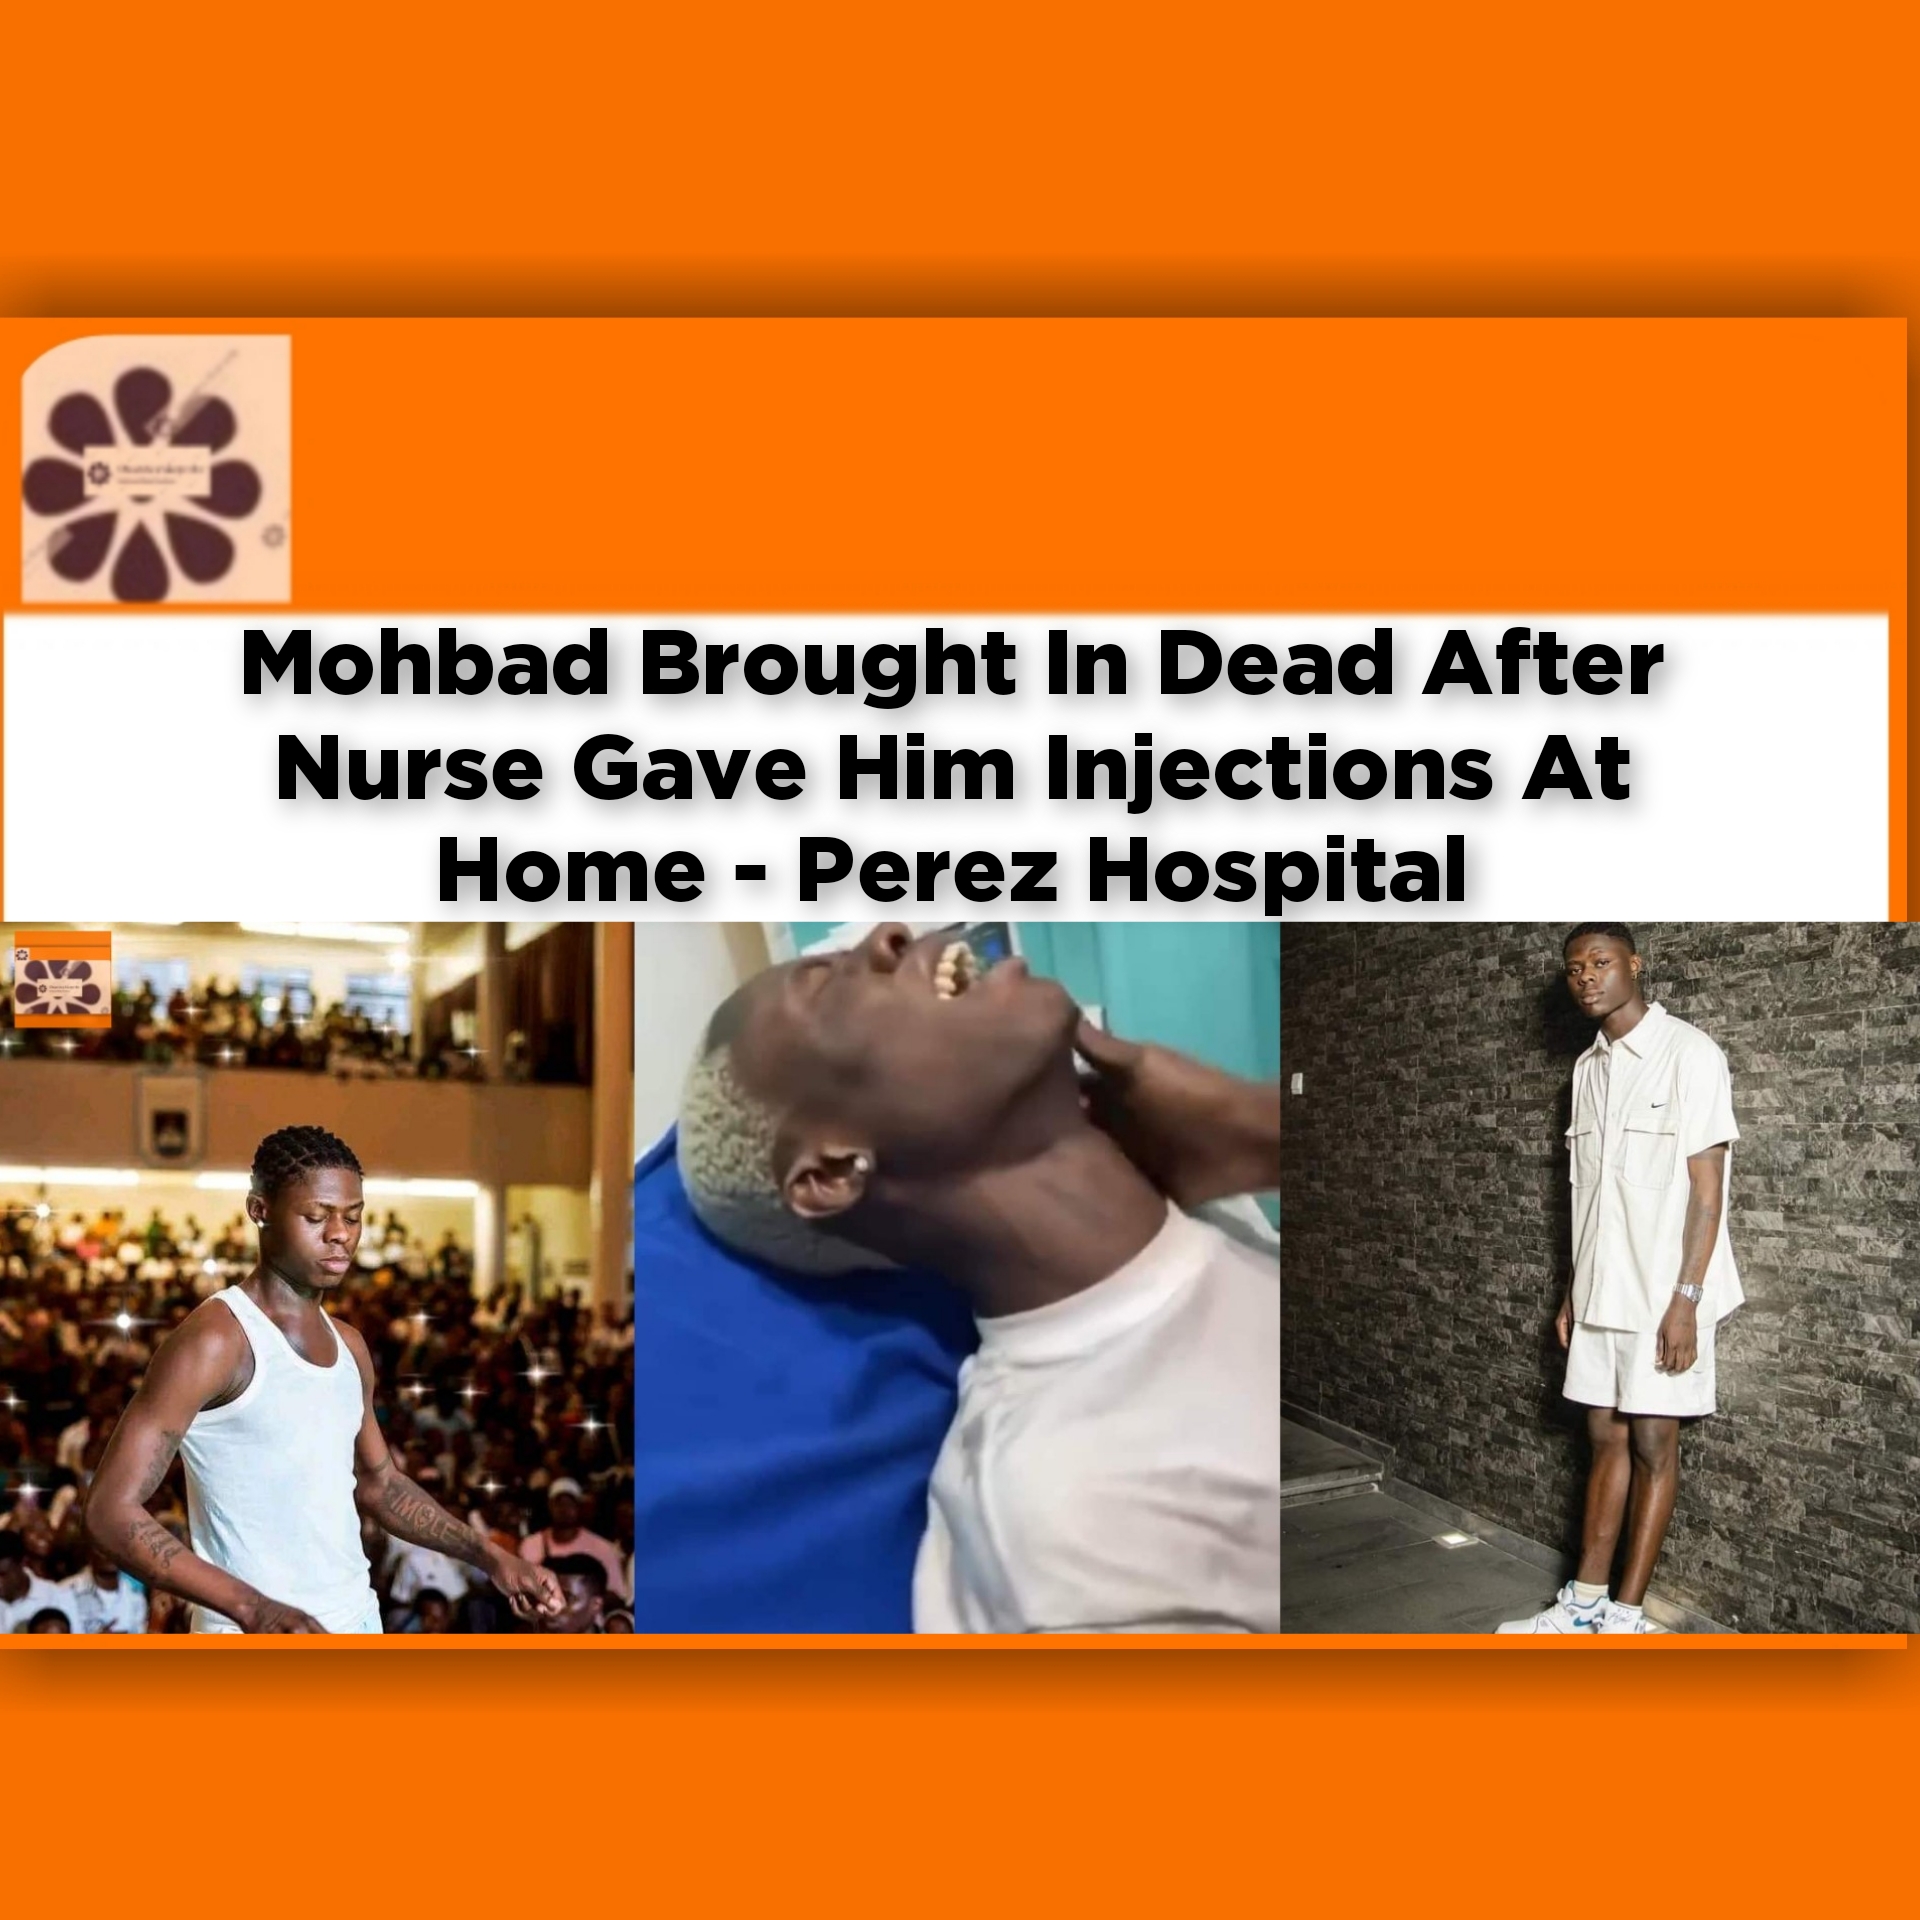 Mohbad Brought In Dead After Nurse Gave Him Injections At Home - Perez Hospital ~ OsazuwaAkonedo #Okechukwu